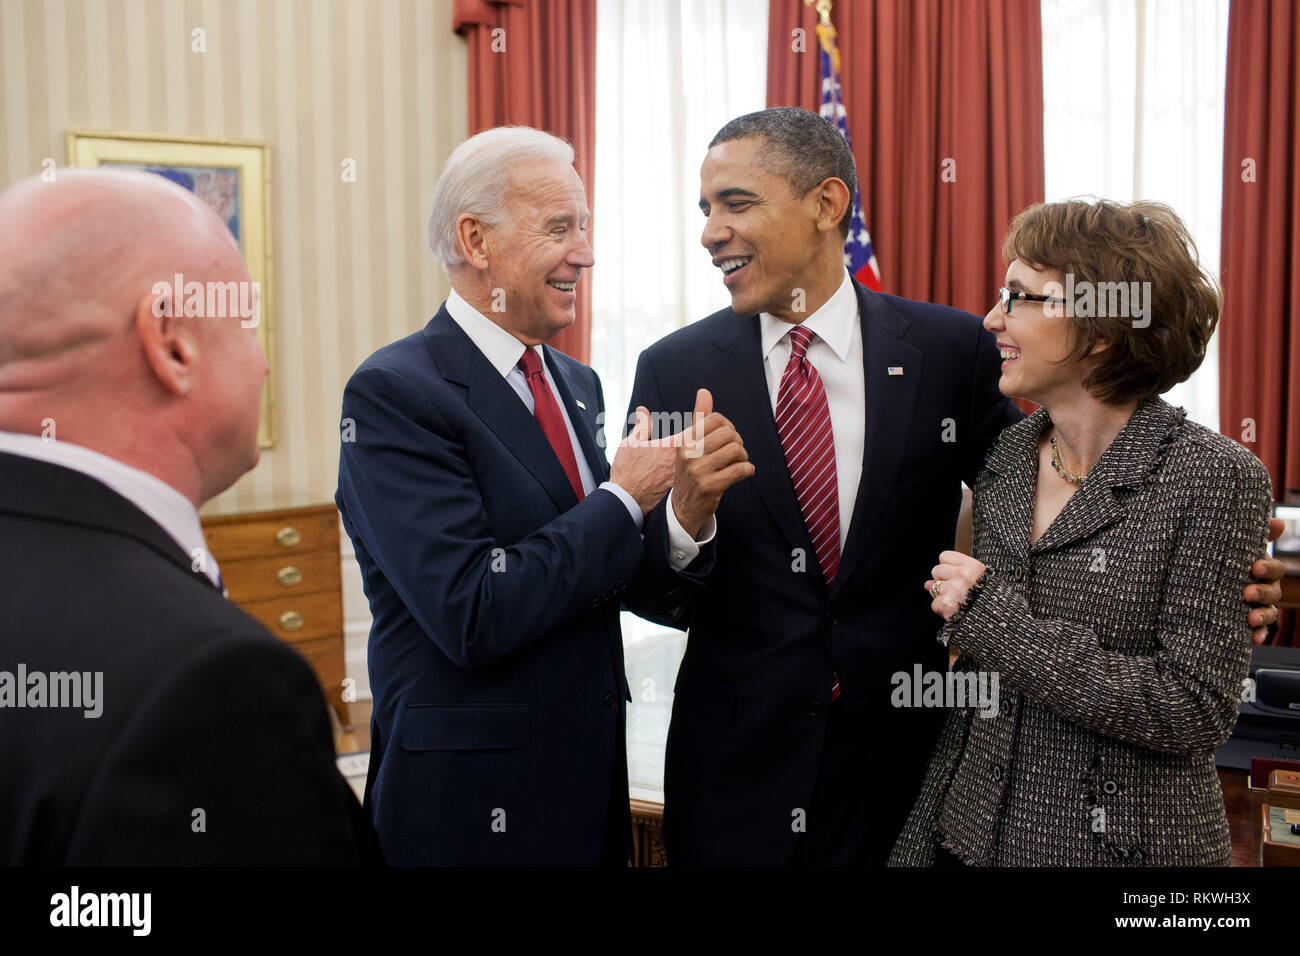 United States President Barack Obama and Vice President Joe Biden talk with former U.S. Representative Gabrielle Giffords (Democrat of Arizona) and her husband, Mark Kelly, after the President signed H.R. 3801, the Ultralight Aircraft Smuggling Prevention Act of 2012, in the Oval Office, February 10, 2012. The bill was the last piece of legislation that Giffords sponsored and voted on in the U.S. House of Representatives. Mandatory Credit: Pete Souza - White House via CNP | usage worldwide Stock Photo